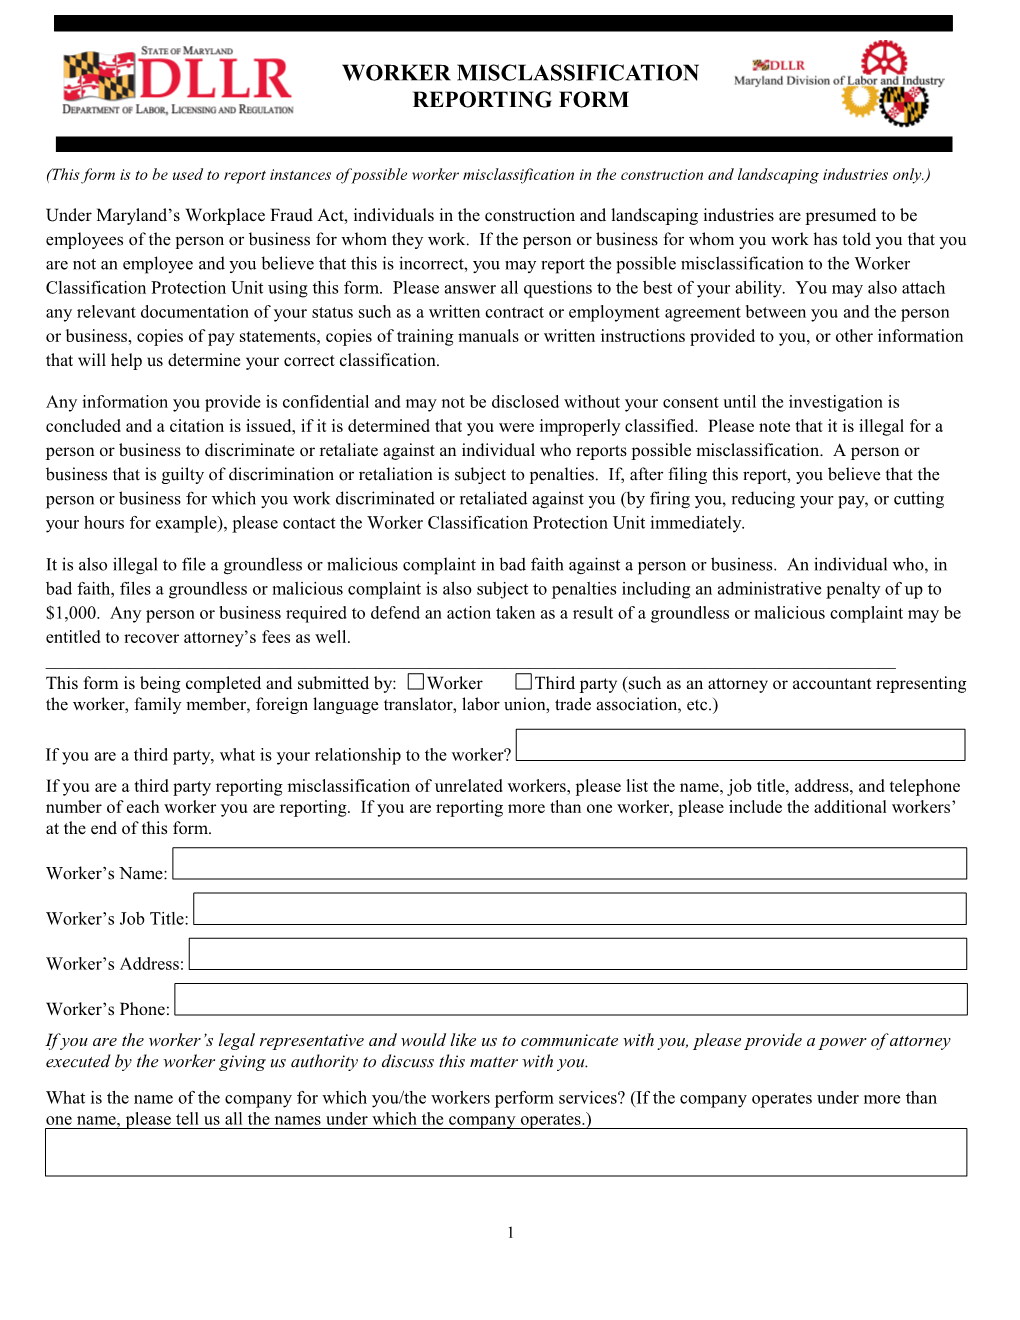 (This Form Is to Be Used to Report Instances of Possible Worker Misclassification in The